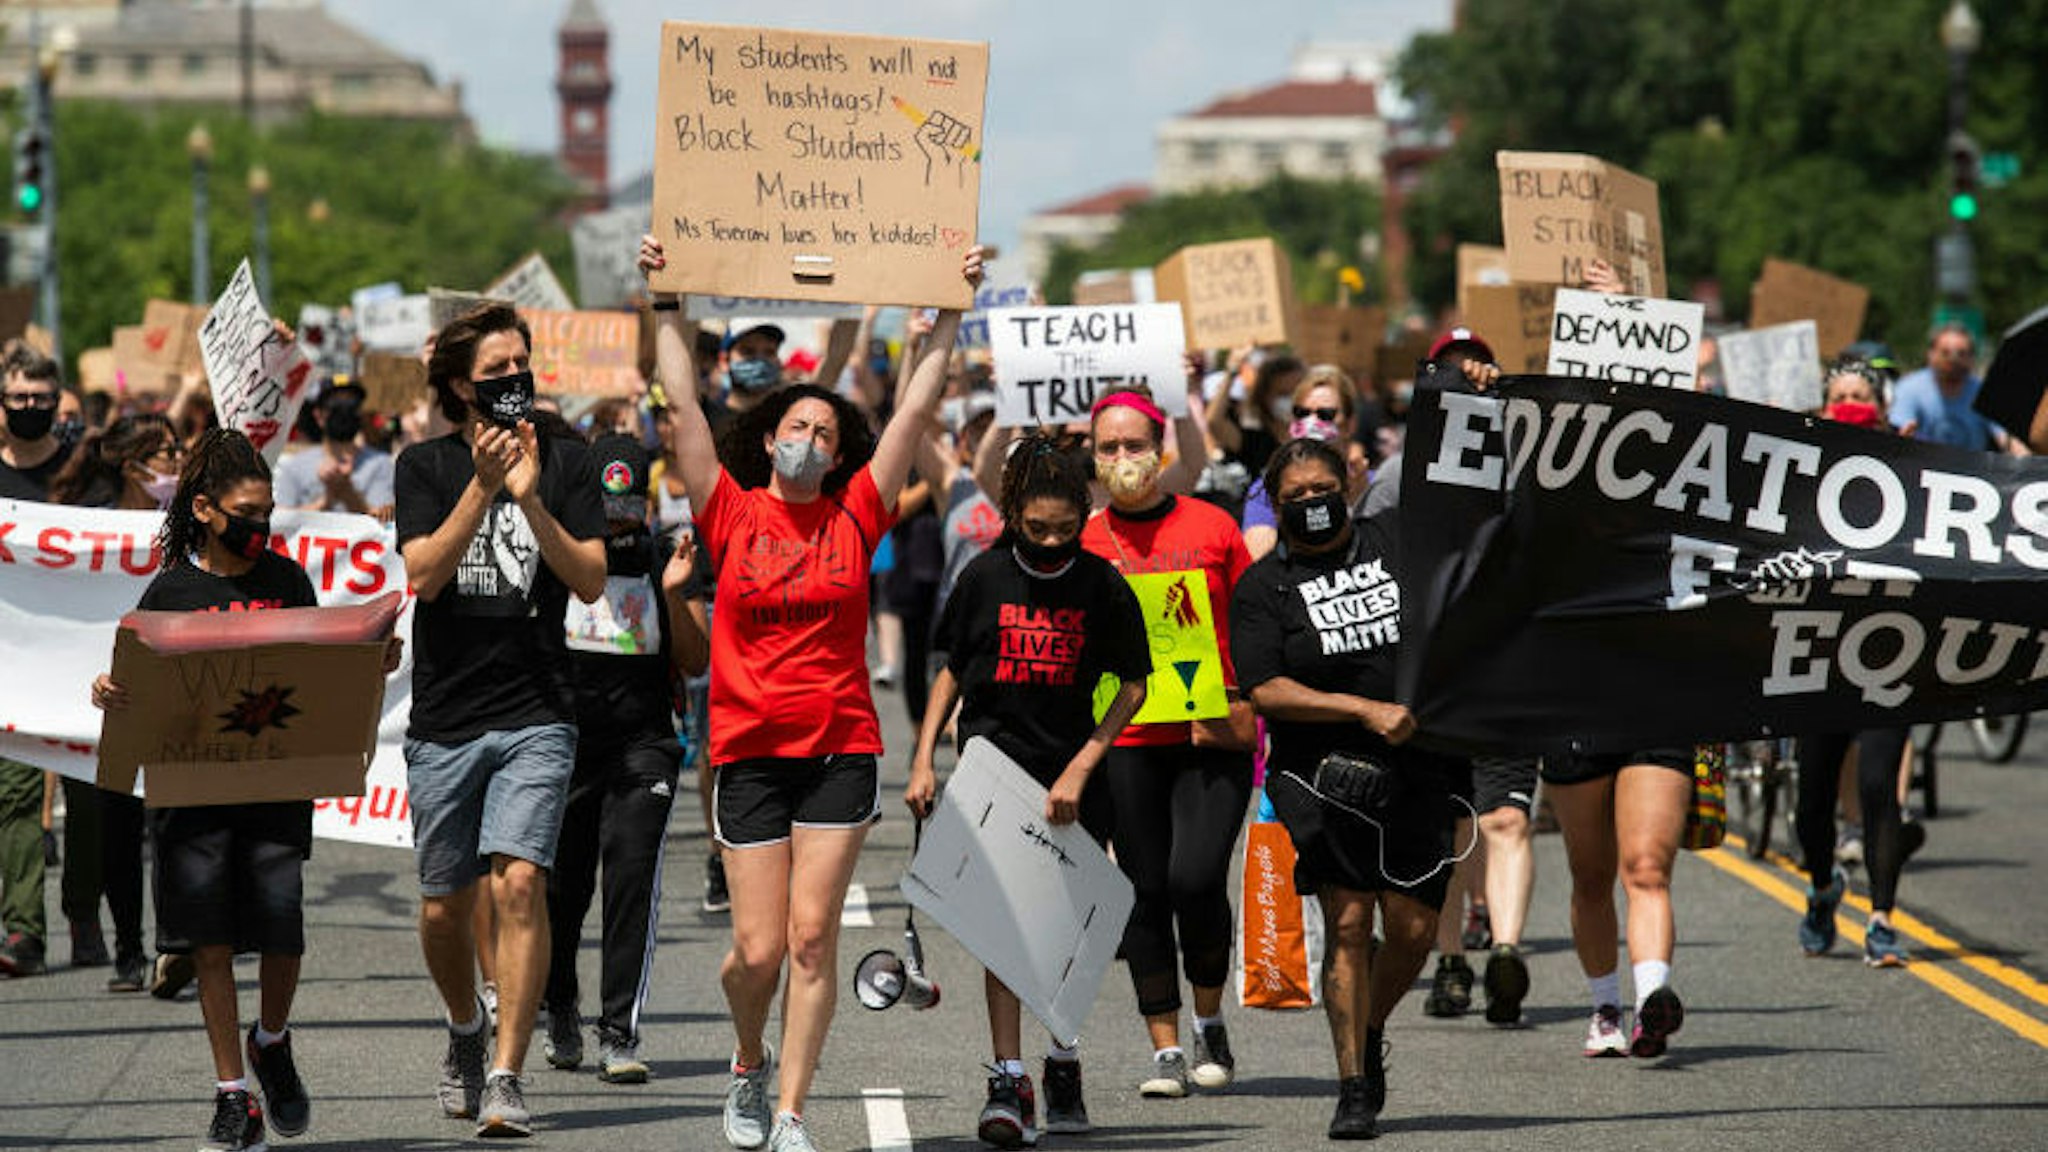 Black Students Matter demonstrators march on Independence Avenue en route to a rally at the Department of Education as part of Juneteenth, a celebration to mark the end of slavery in the U.S., on Friday, June 19, 2020. (Photo By Tom Williams/CQ-Roll Call, Inc via Getty Images)